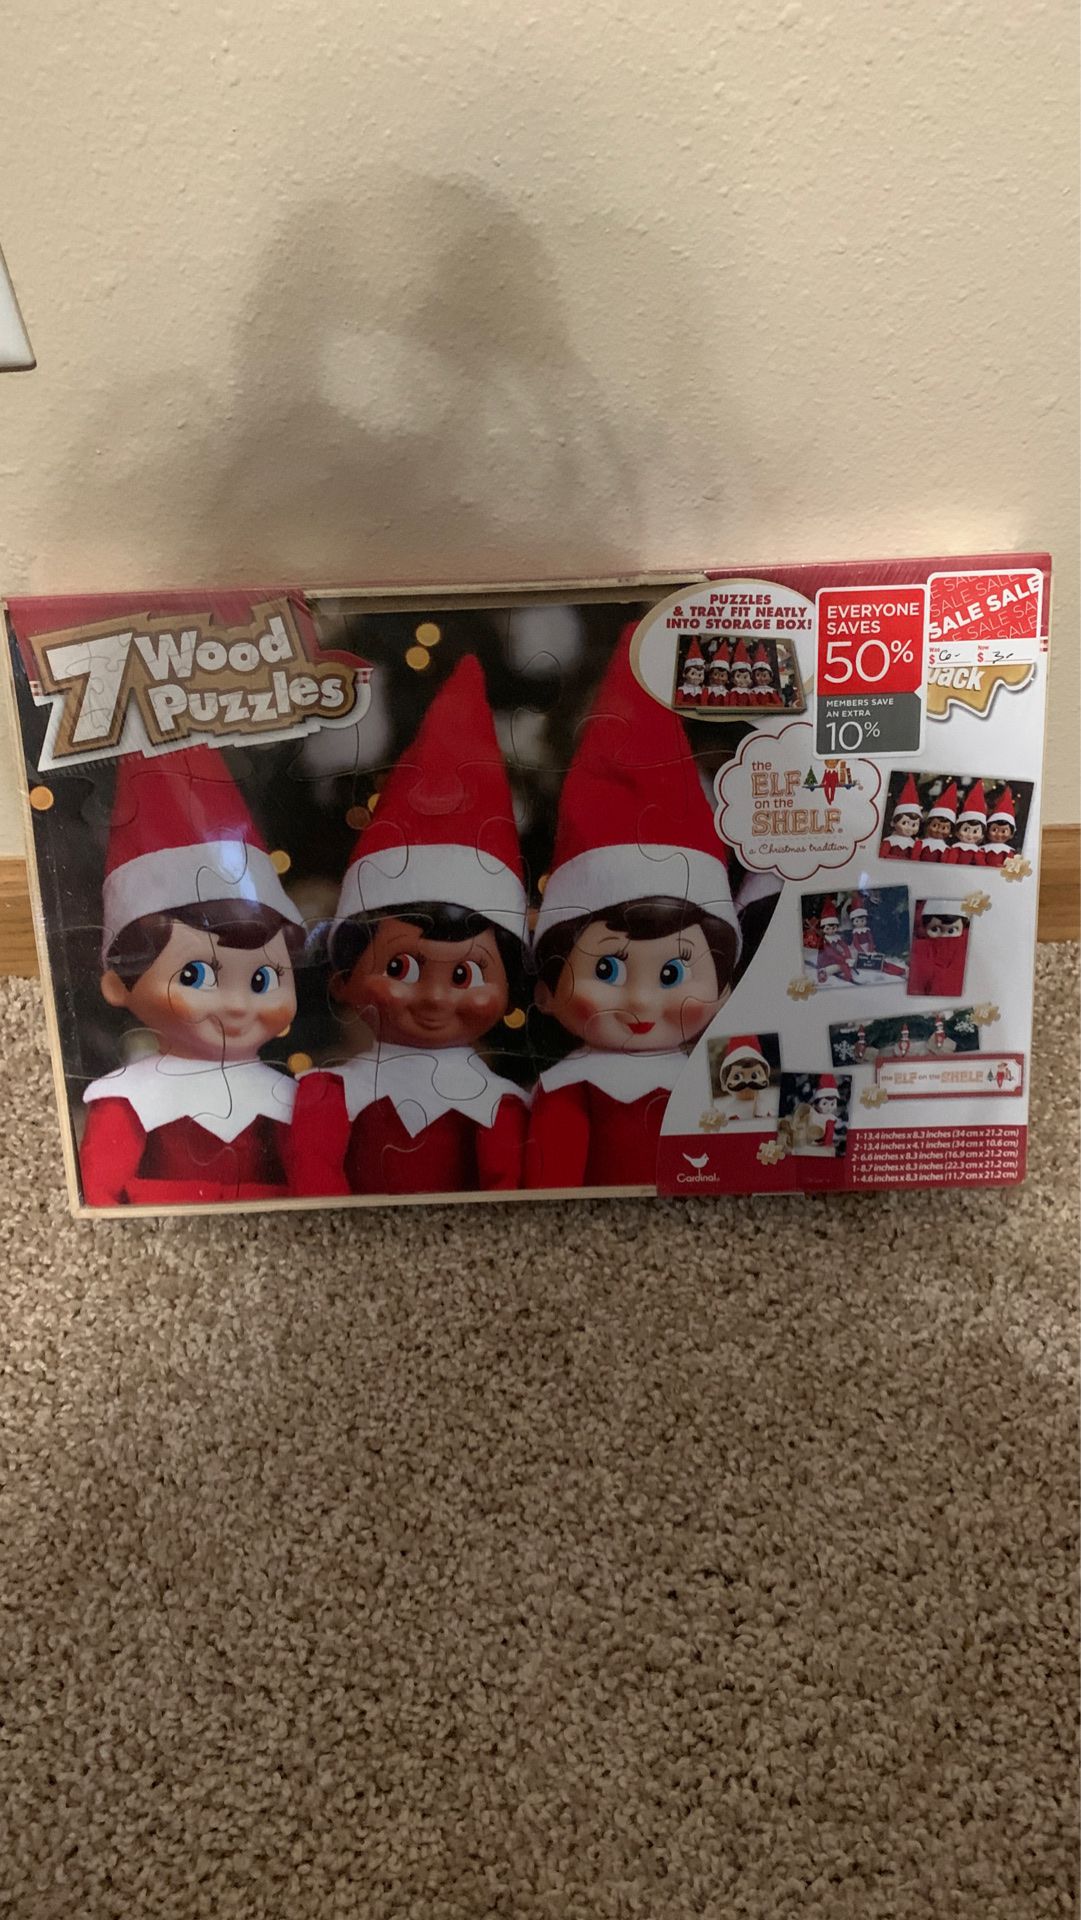 NIB: The Elf on the Shelf Wooden Puzzles